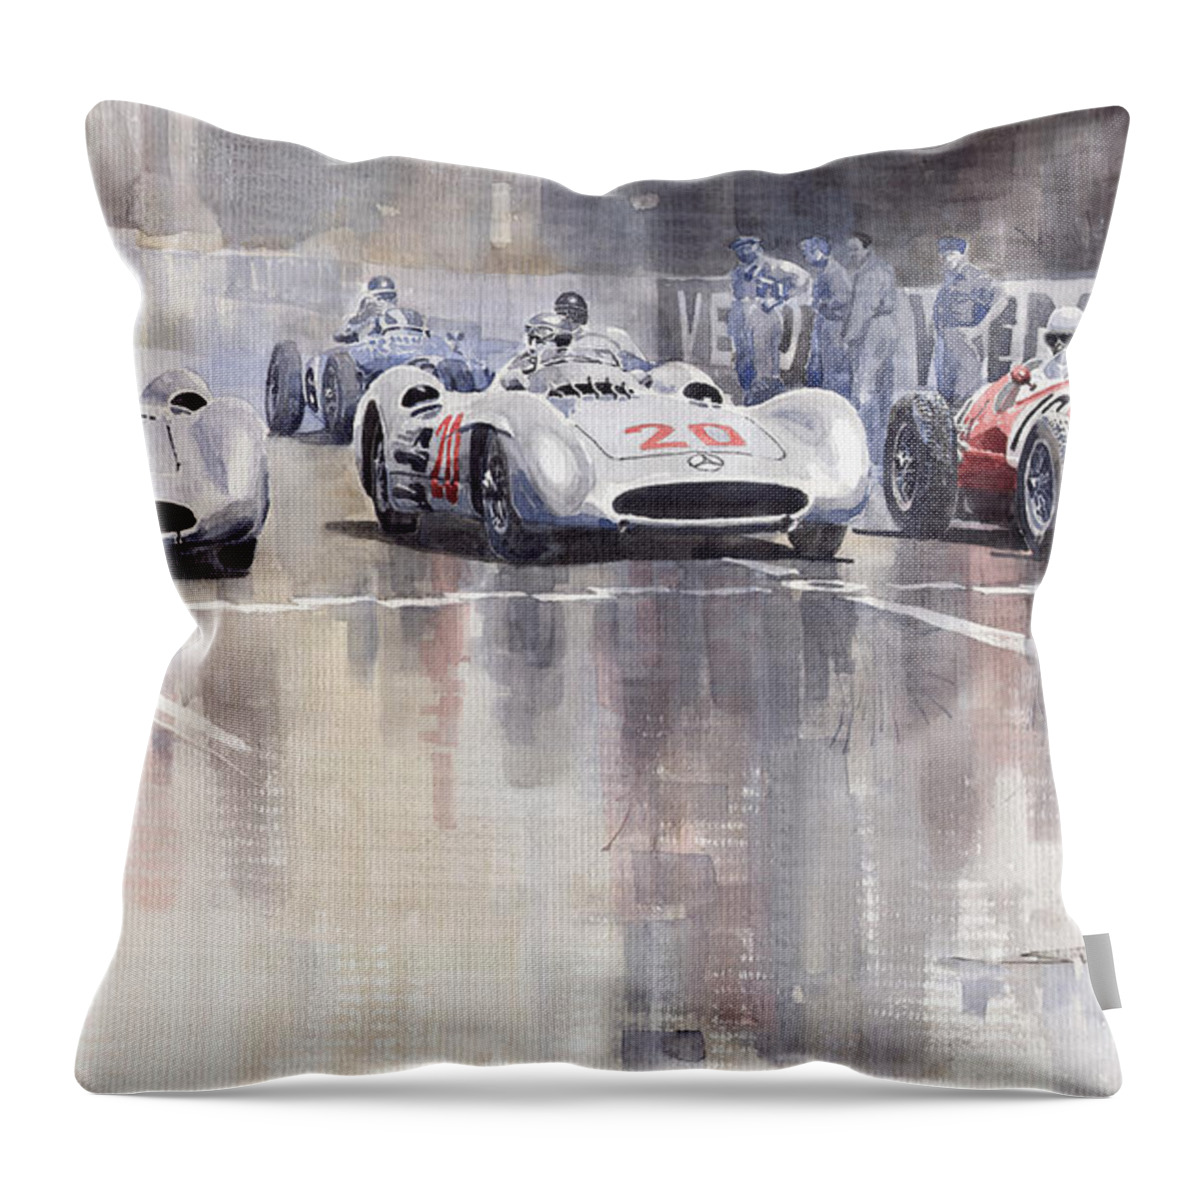 Watercolour Throw Pillow featuring the painting French GP 1954 MB W 196 Meserati 250 F by Yuriy Shevchuk